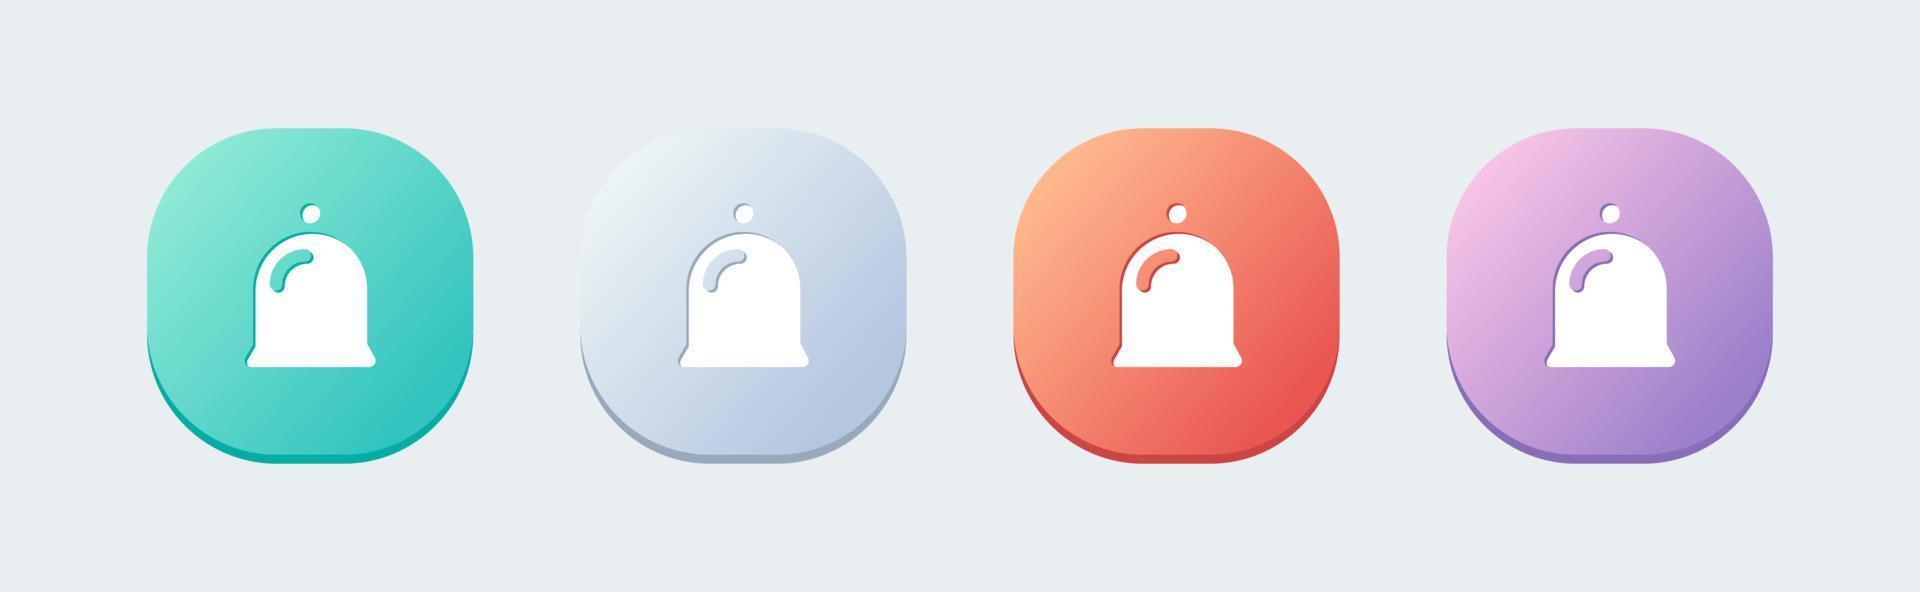 Bell notification solid icon in flat design style. Alert signs vector illustration.